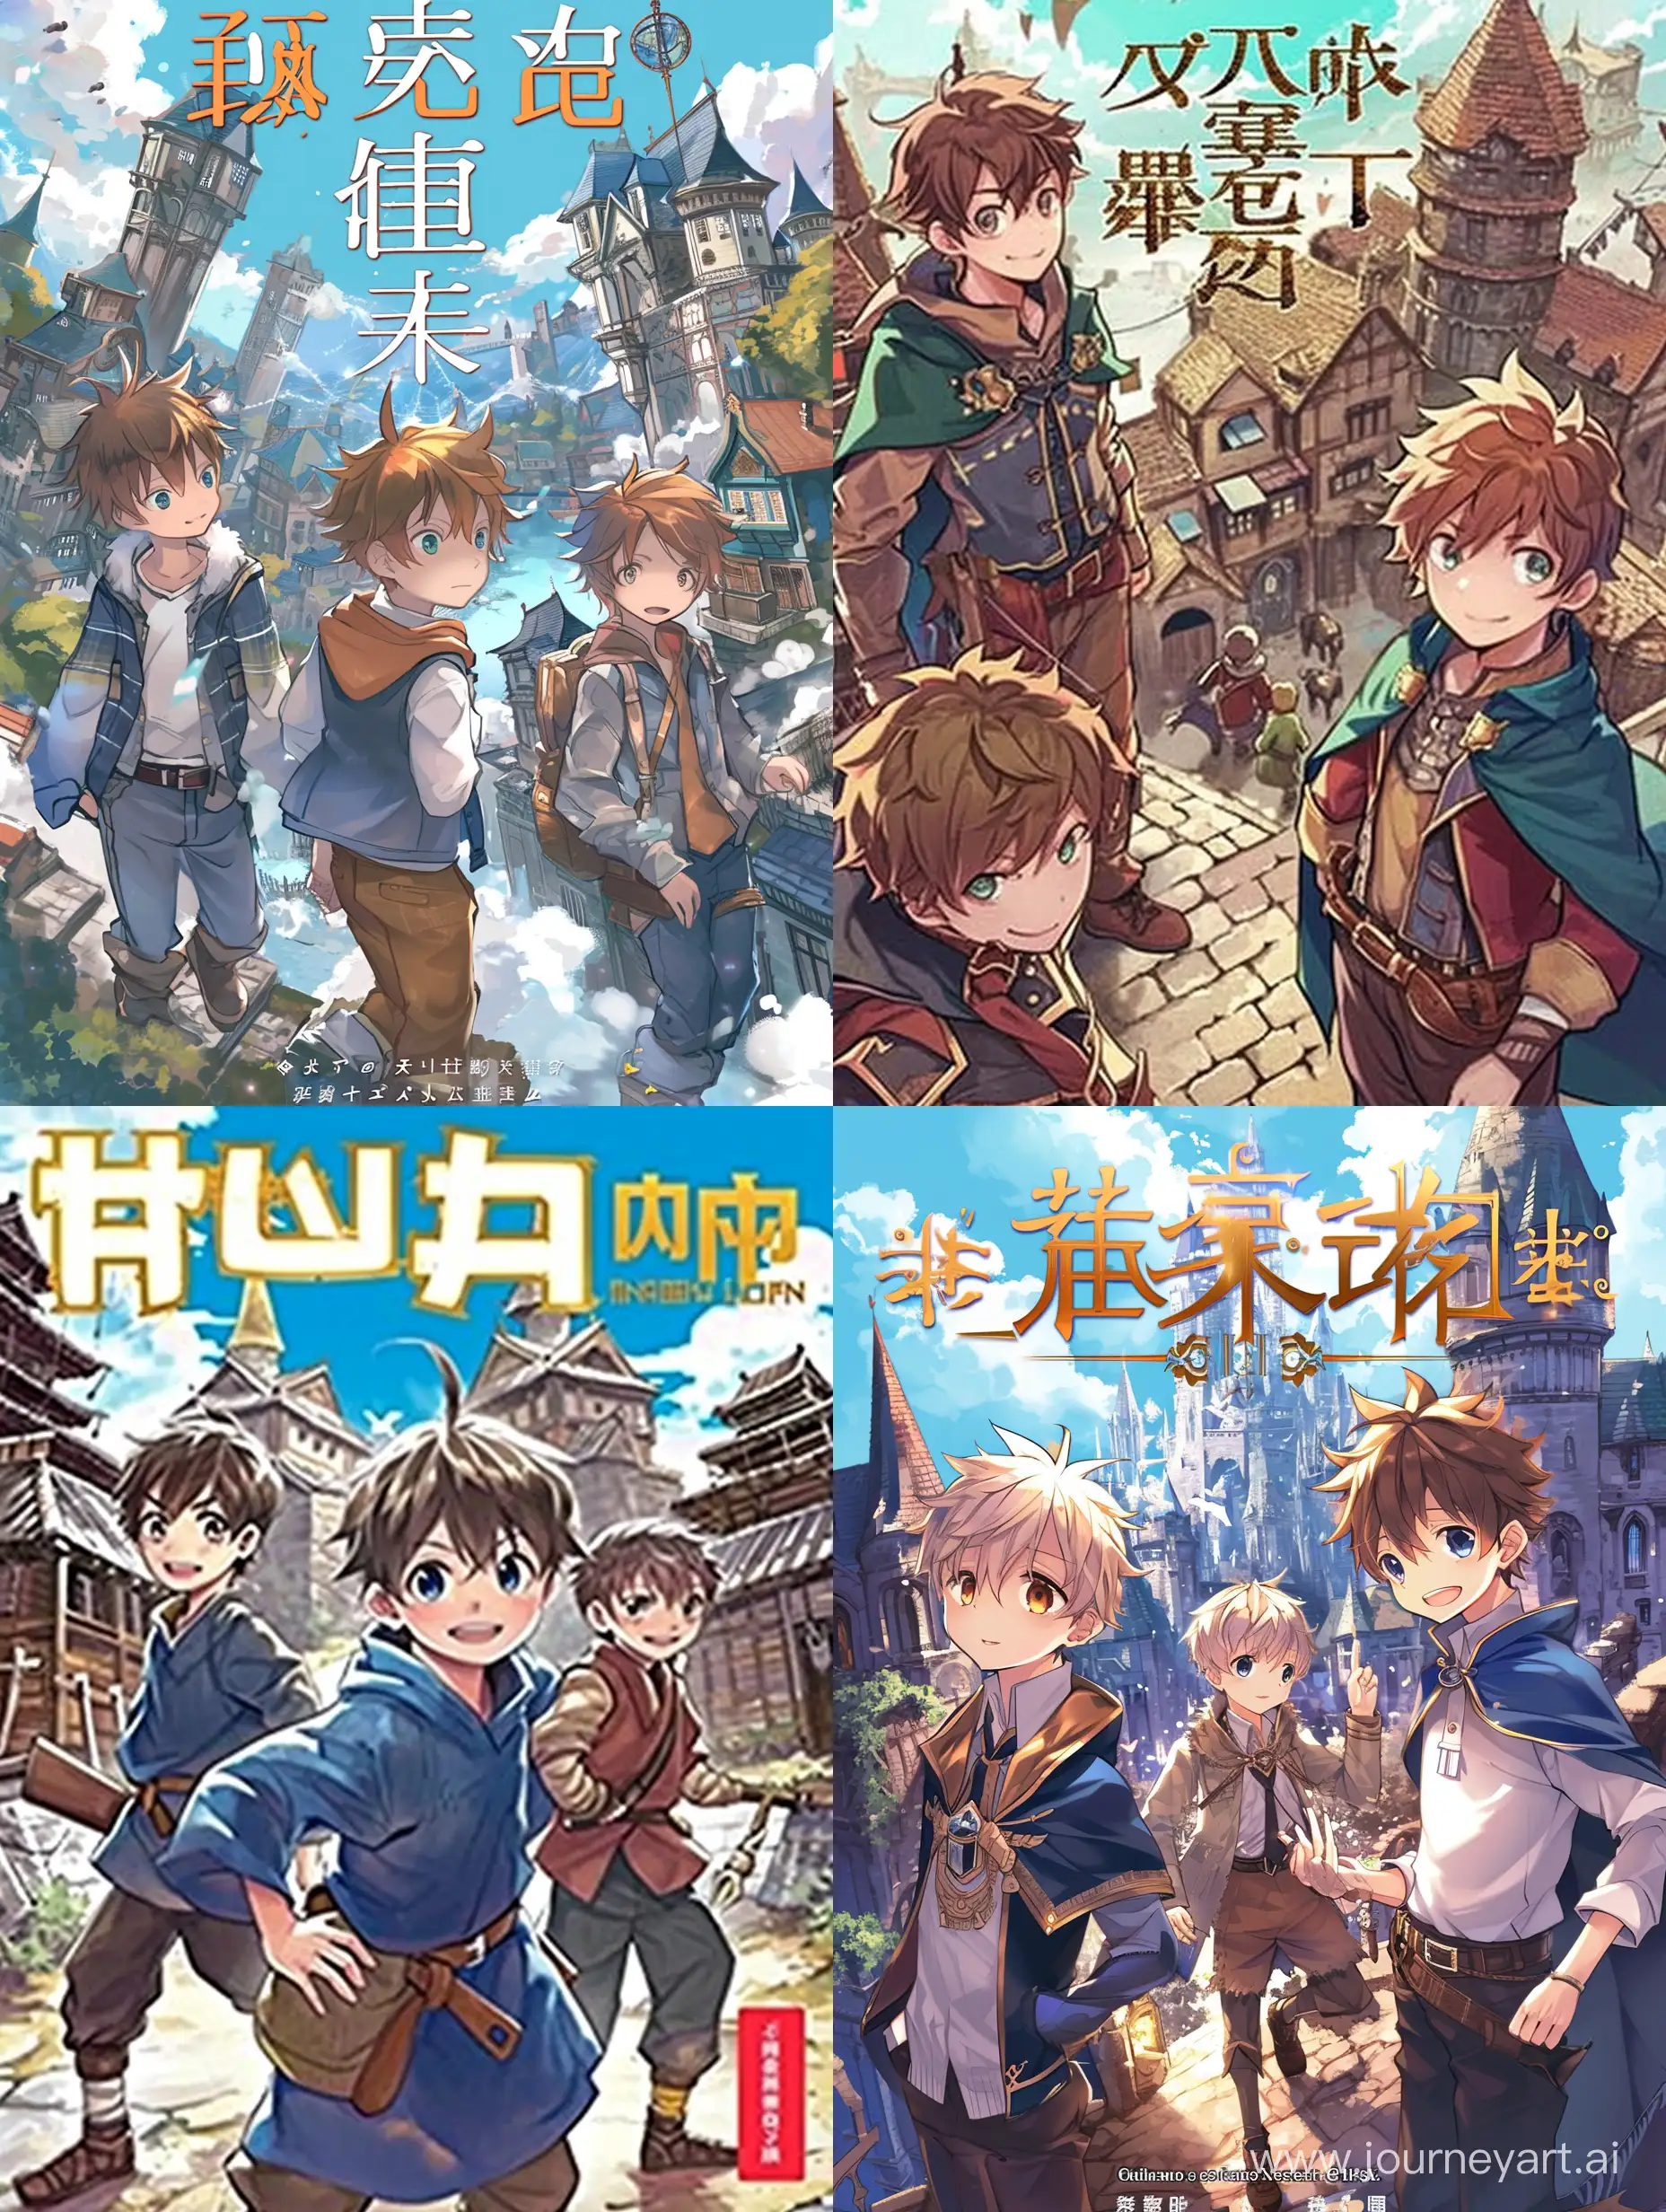 The cover for light novel, three boys and fantasy world with buildings, genres: fantasy and isekai.